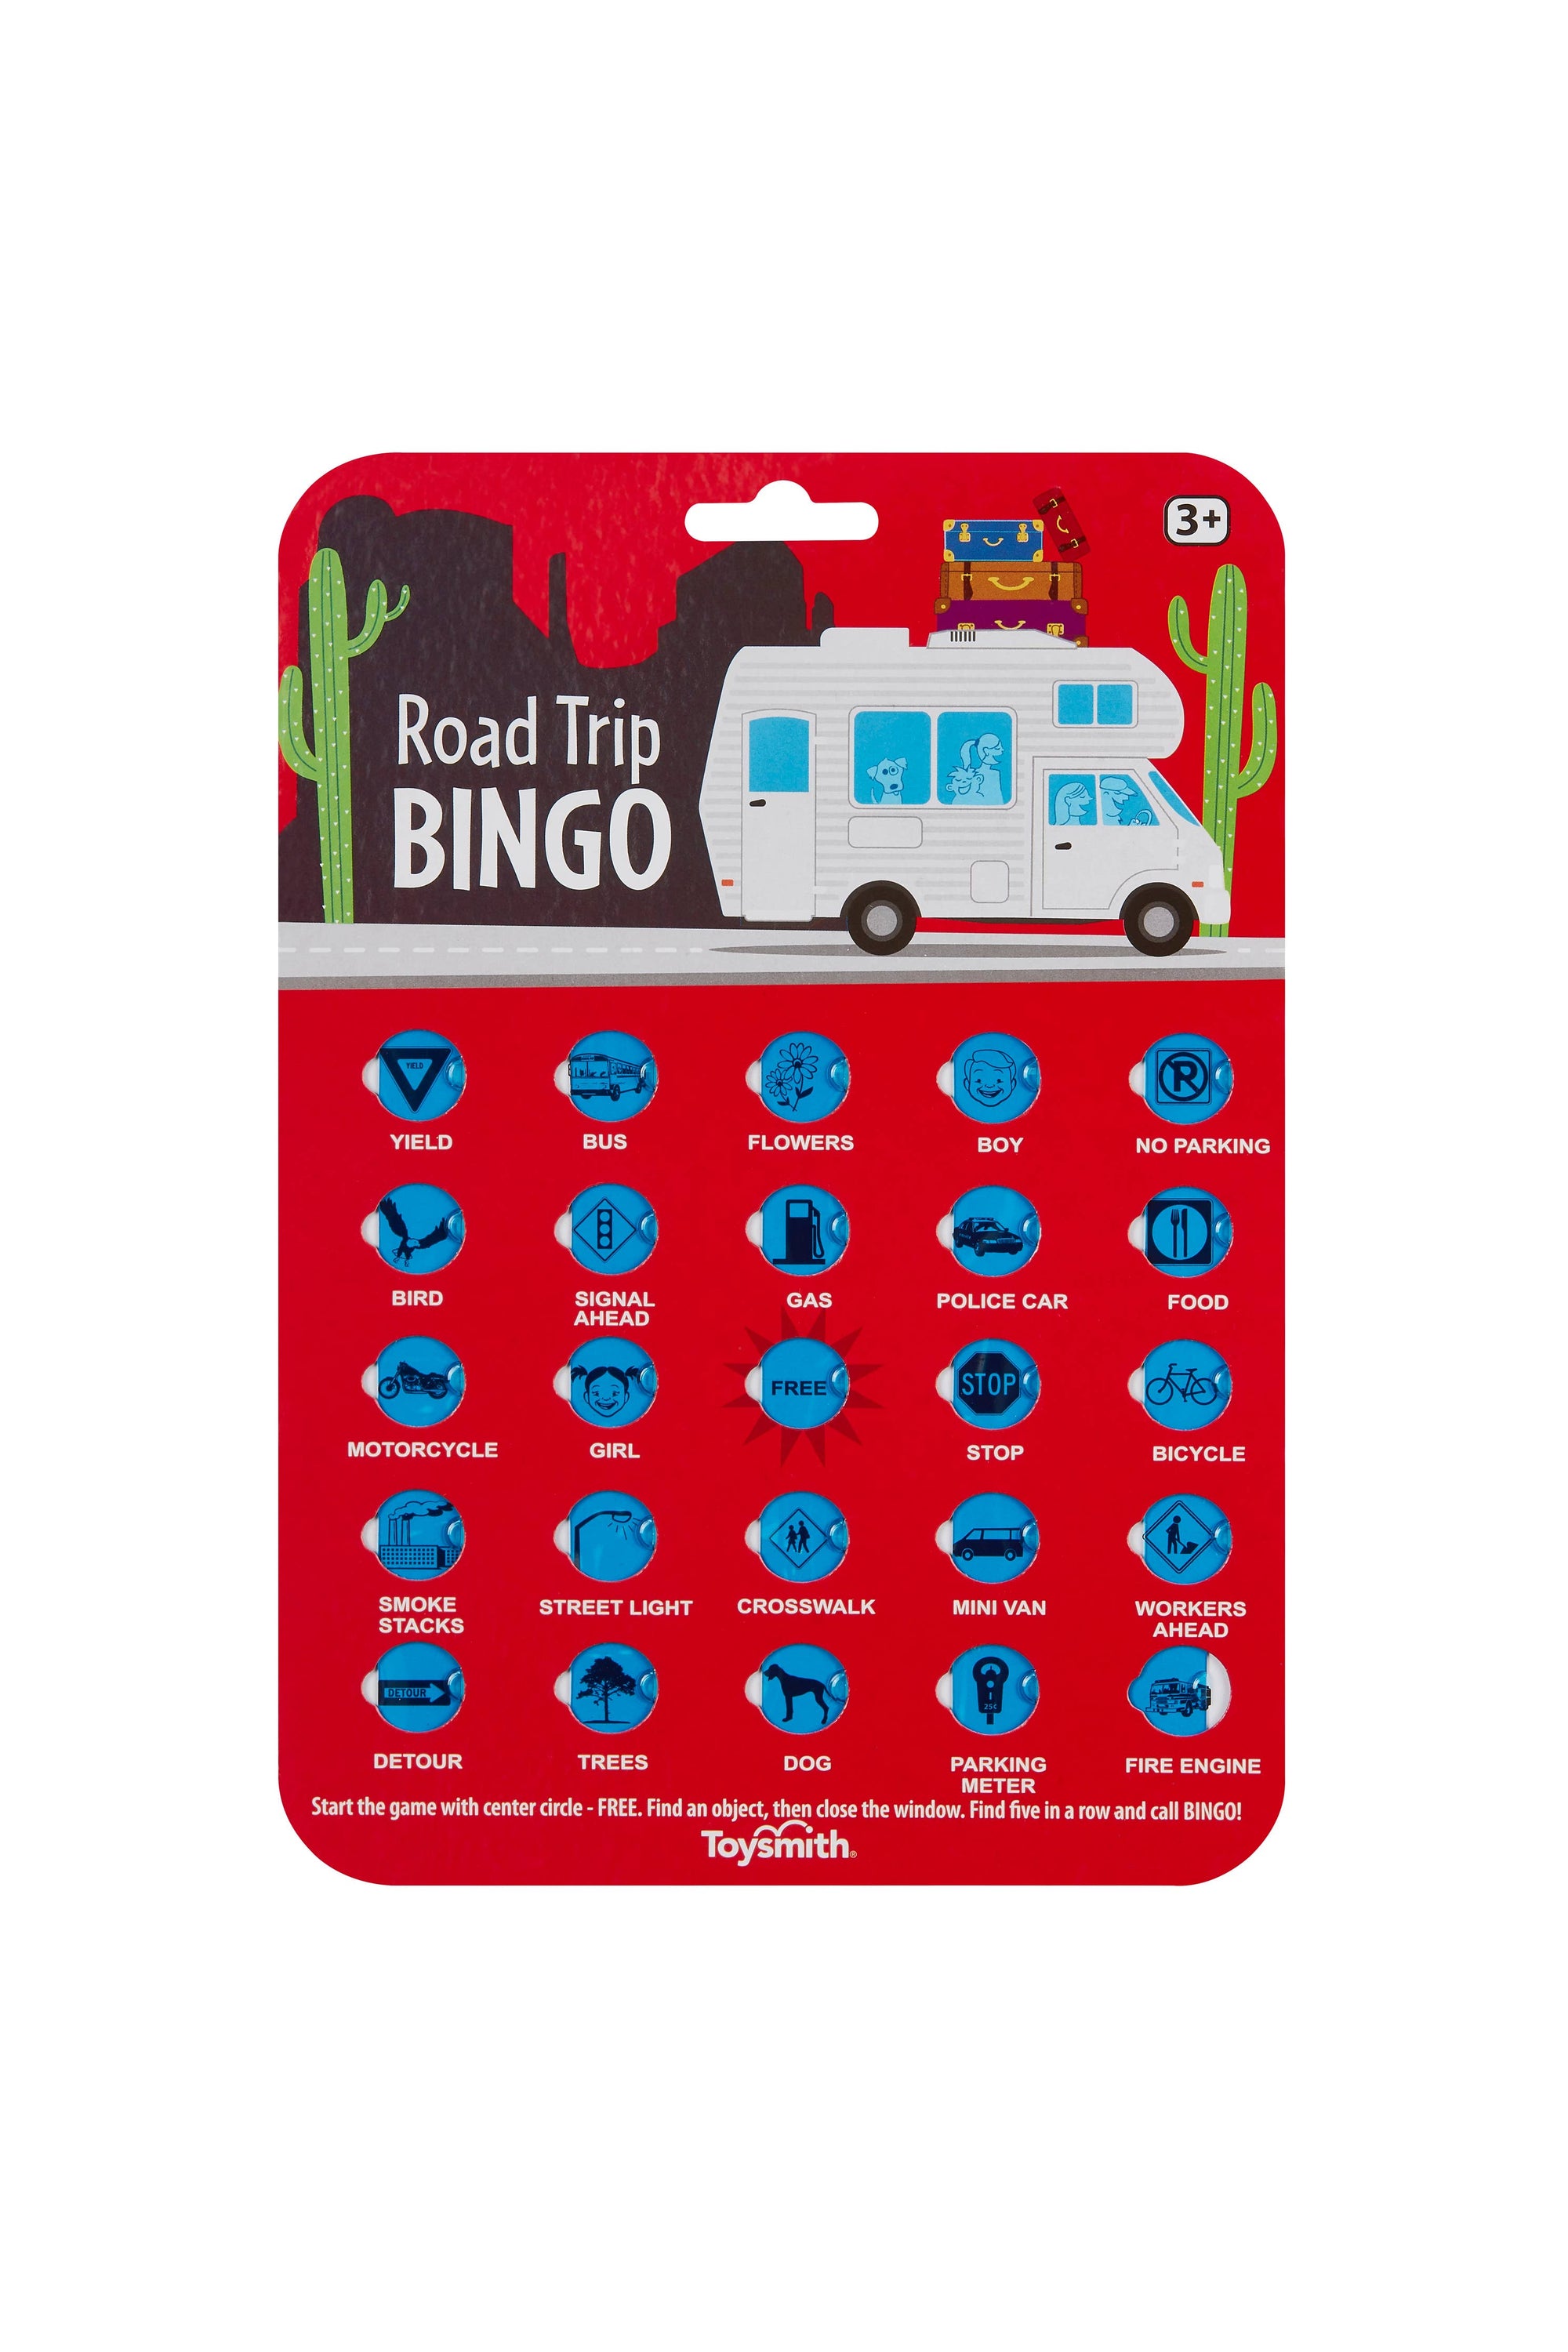 Road Trip BINGO, Travel Game meets RV adventures through desert landscapes filled with towering cactus. Play the classic game while gazing out the transparent window, spotting familiar objects and completing your bingo cards for a fun road trip experience.